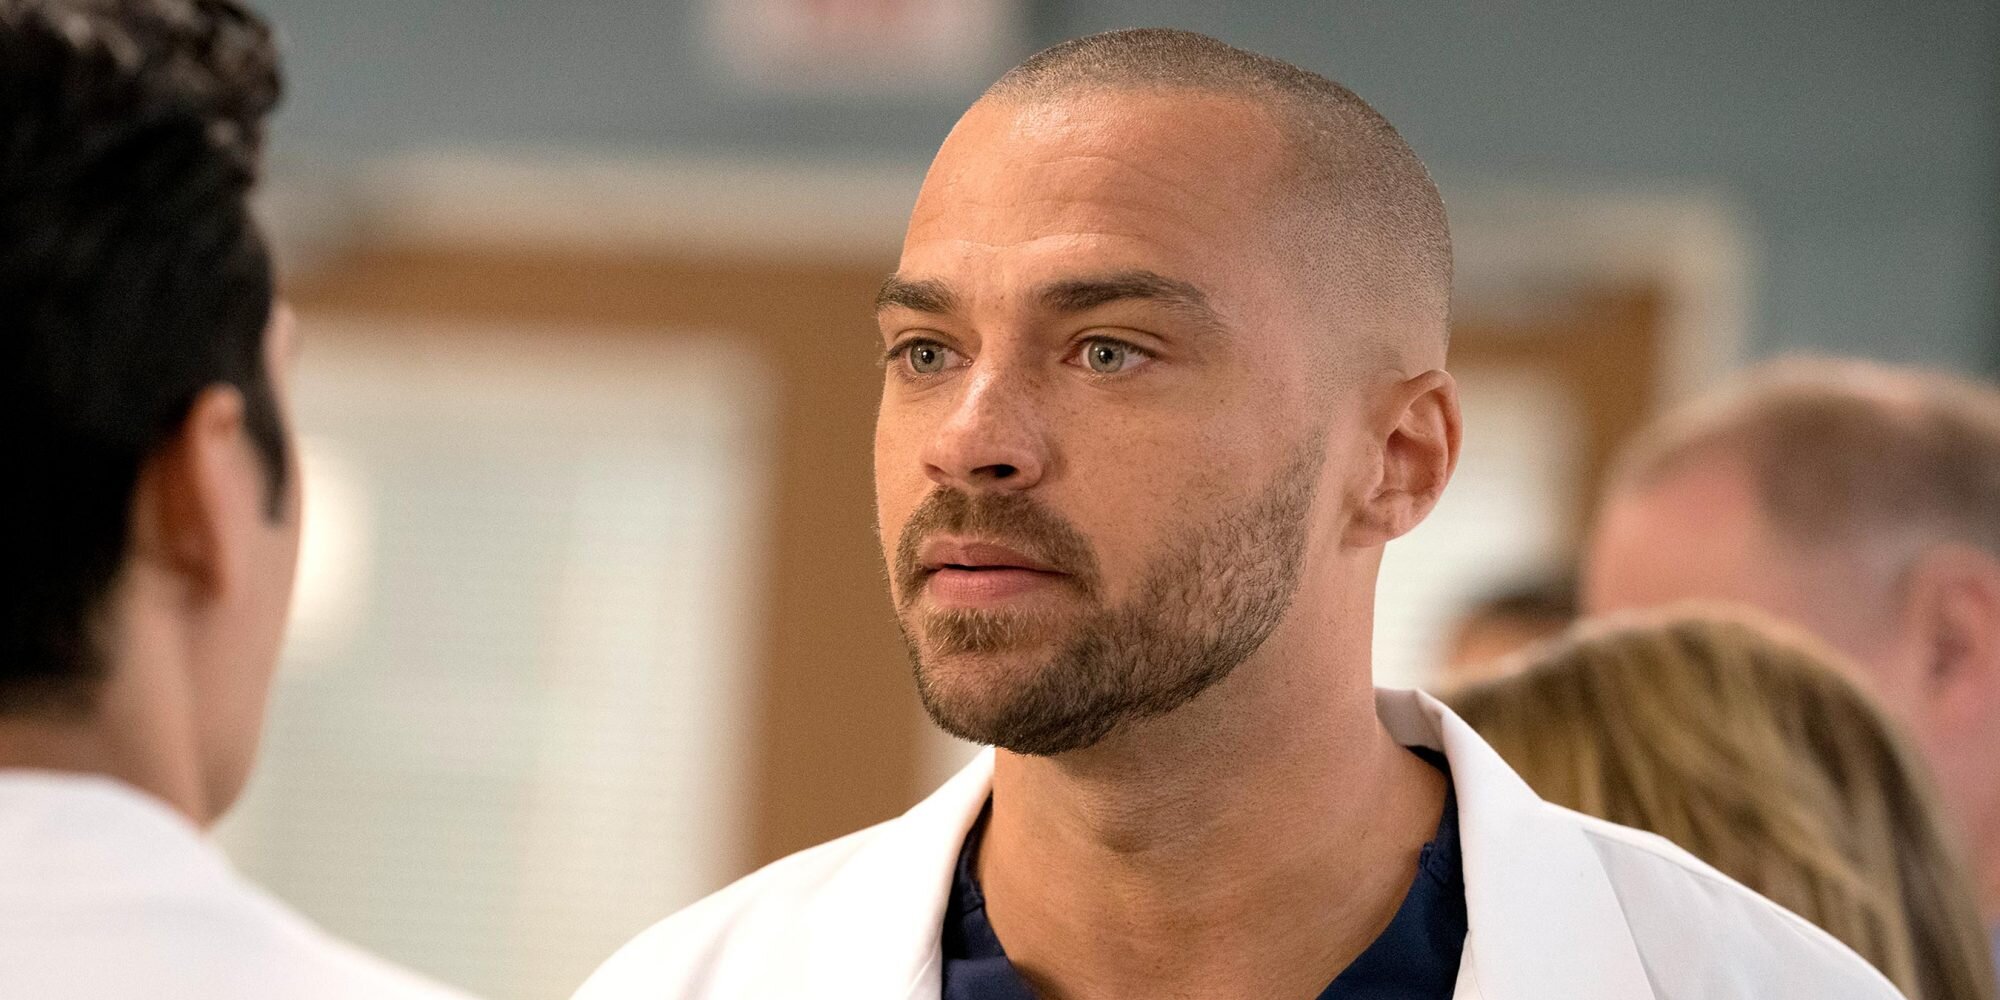 Jesse Williams From Grey’s Anatomy Is Leaving and I’m Not Okay